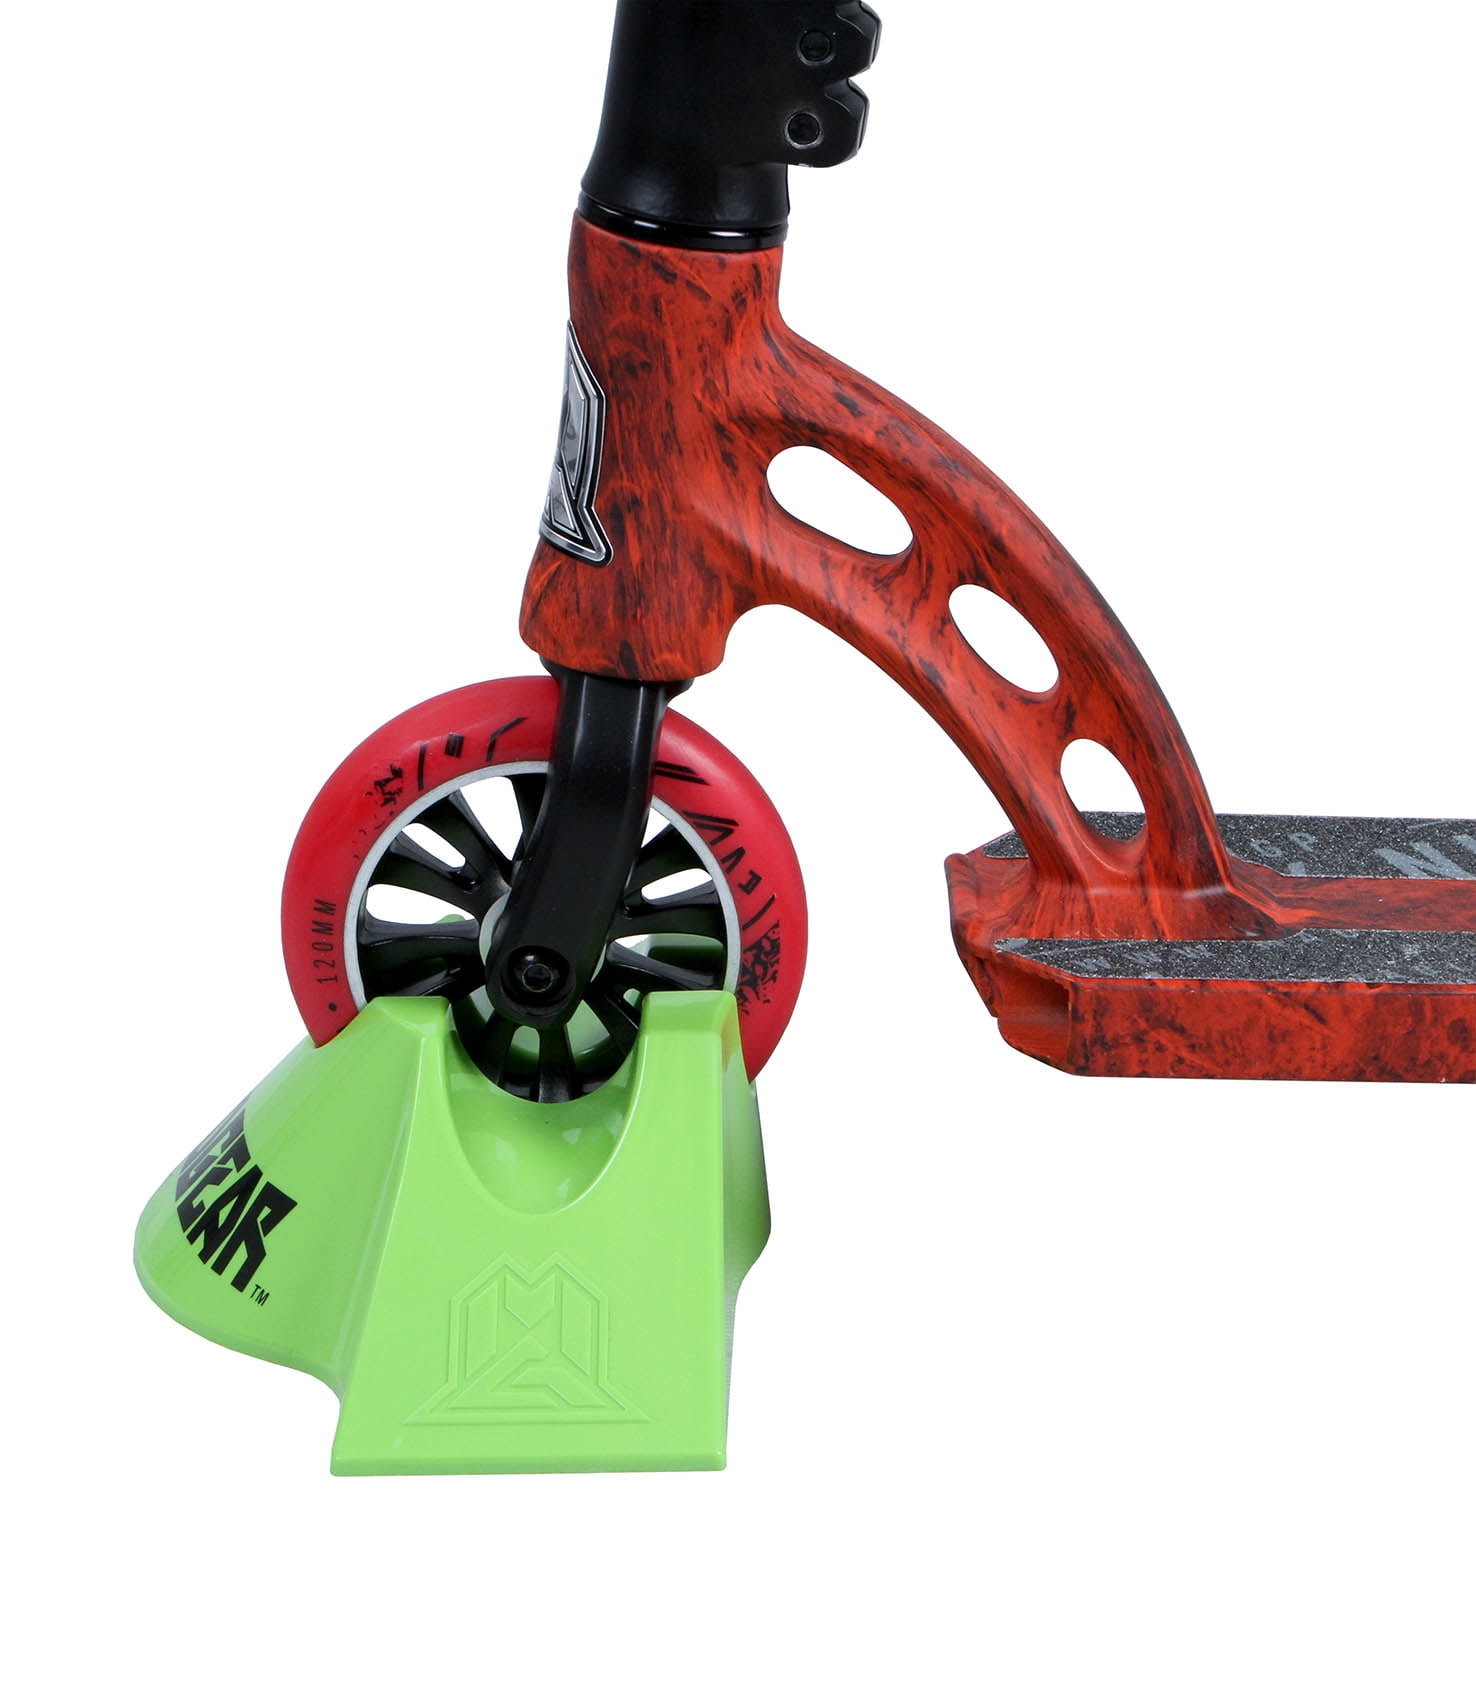 Madd Gear Pro Portable Garage Scooter Stand Holder Item# 206-144 Lime Green 